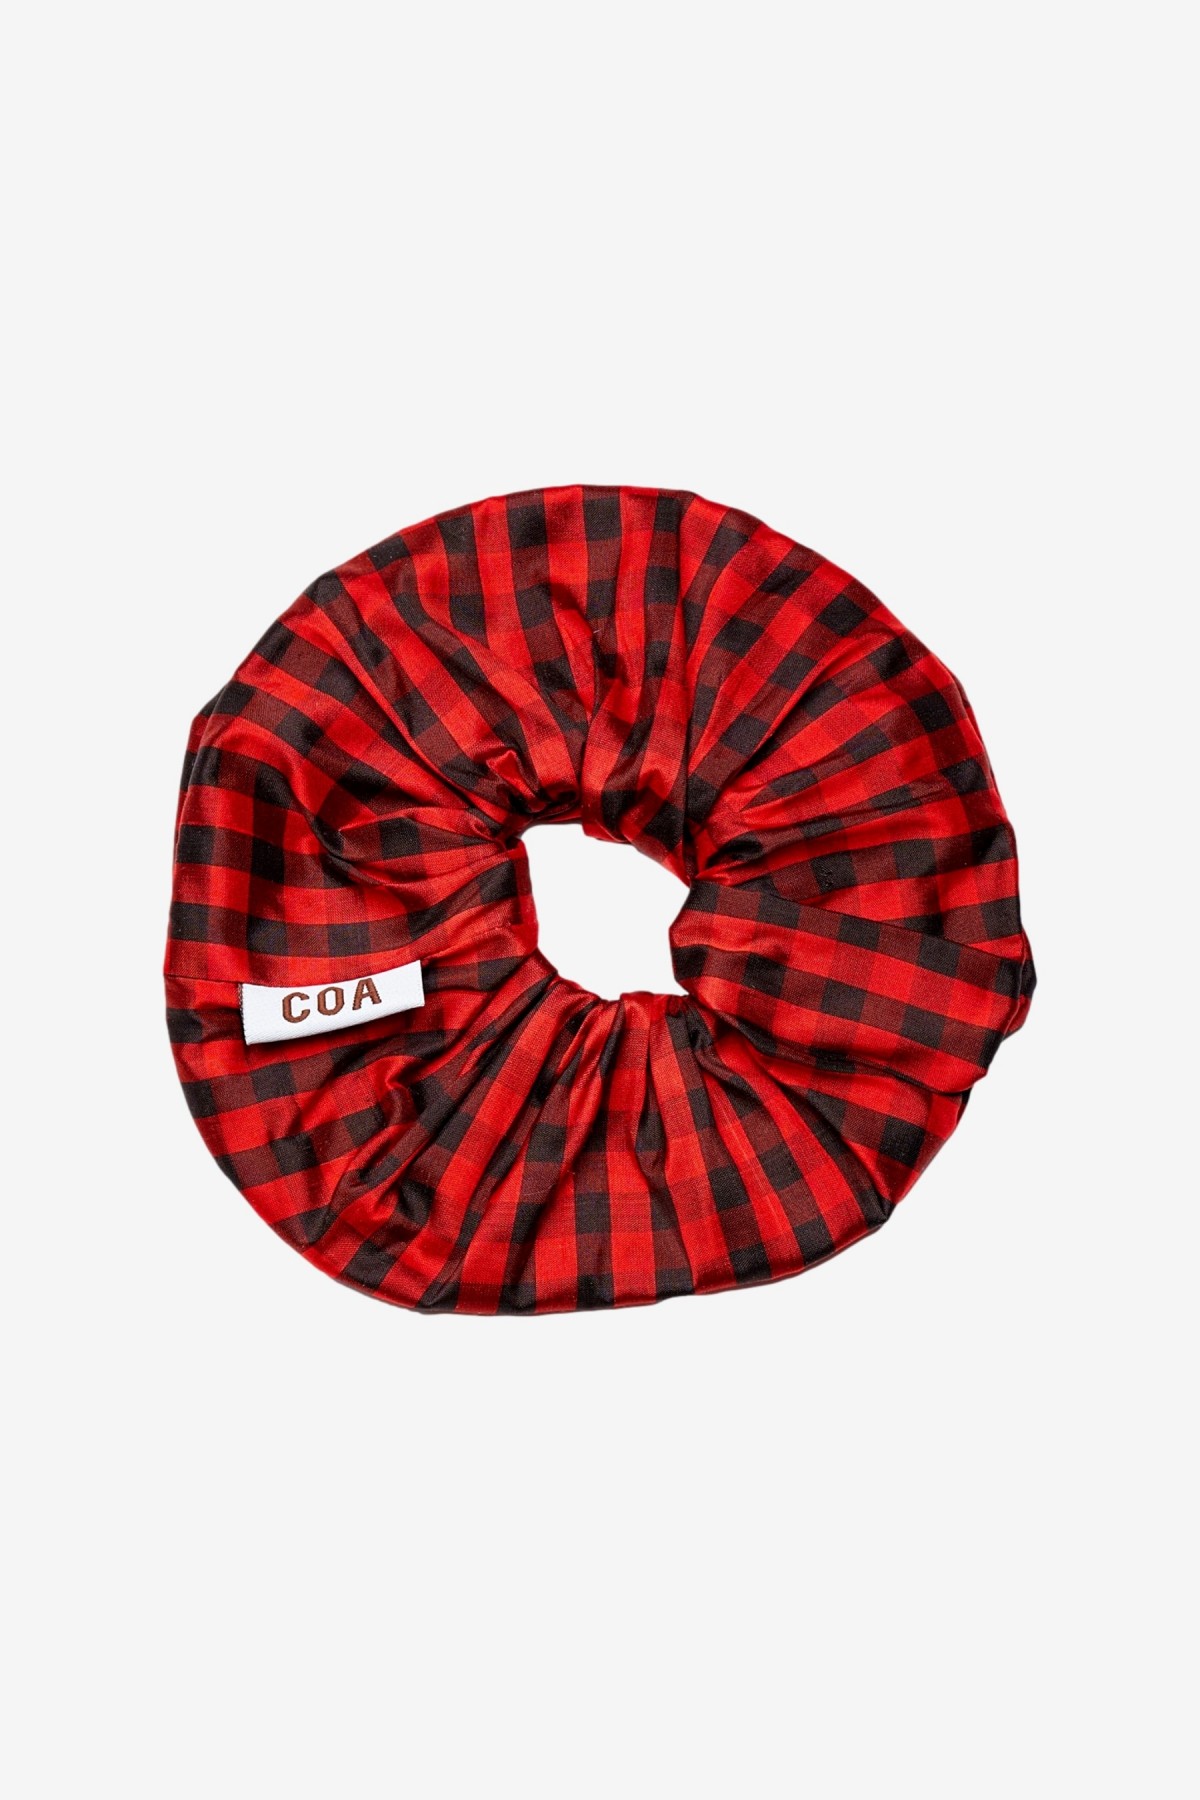 CoA NYC Oversized Scrunchie in Brown/Red Gingham